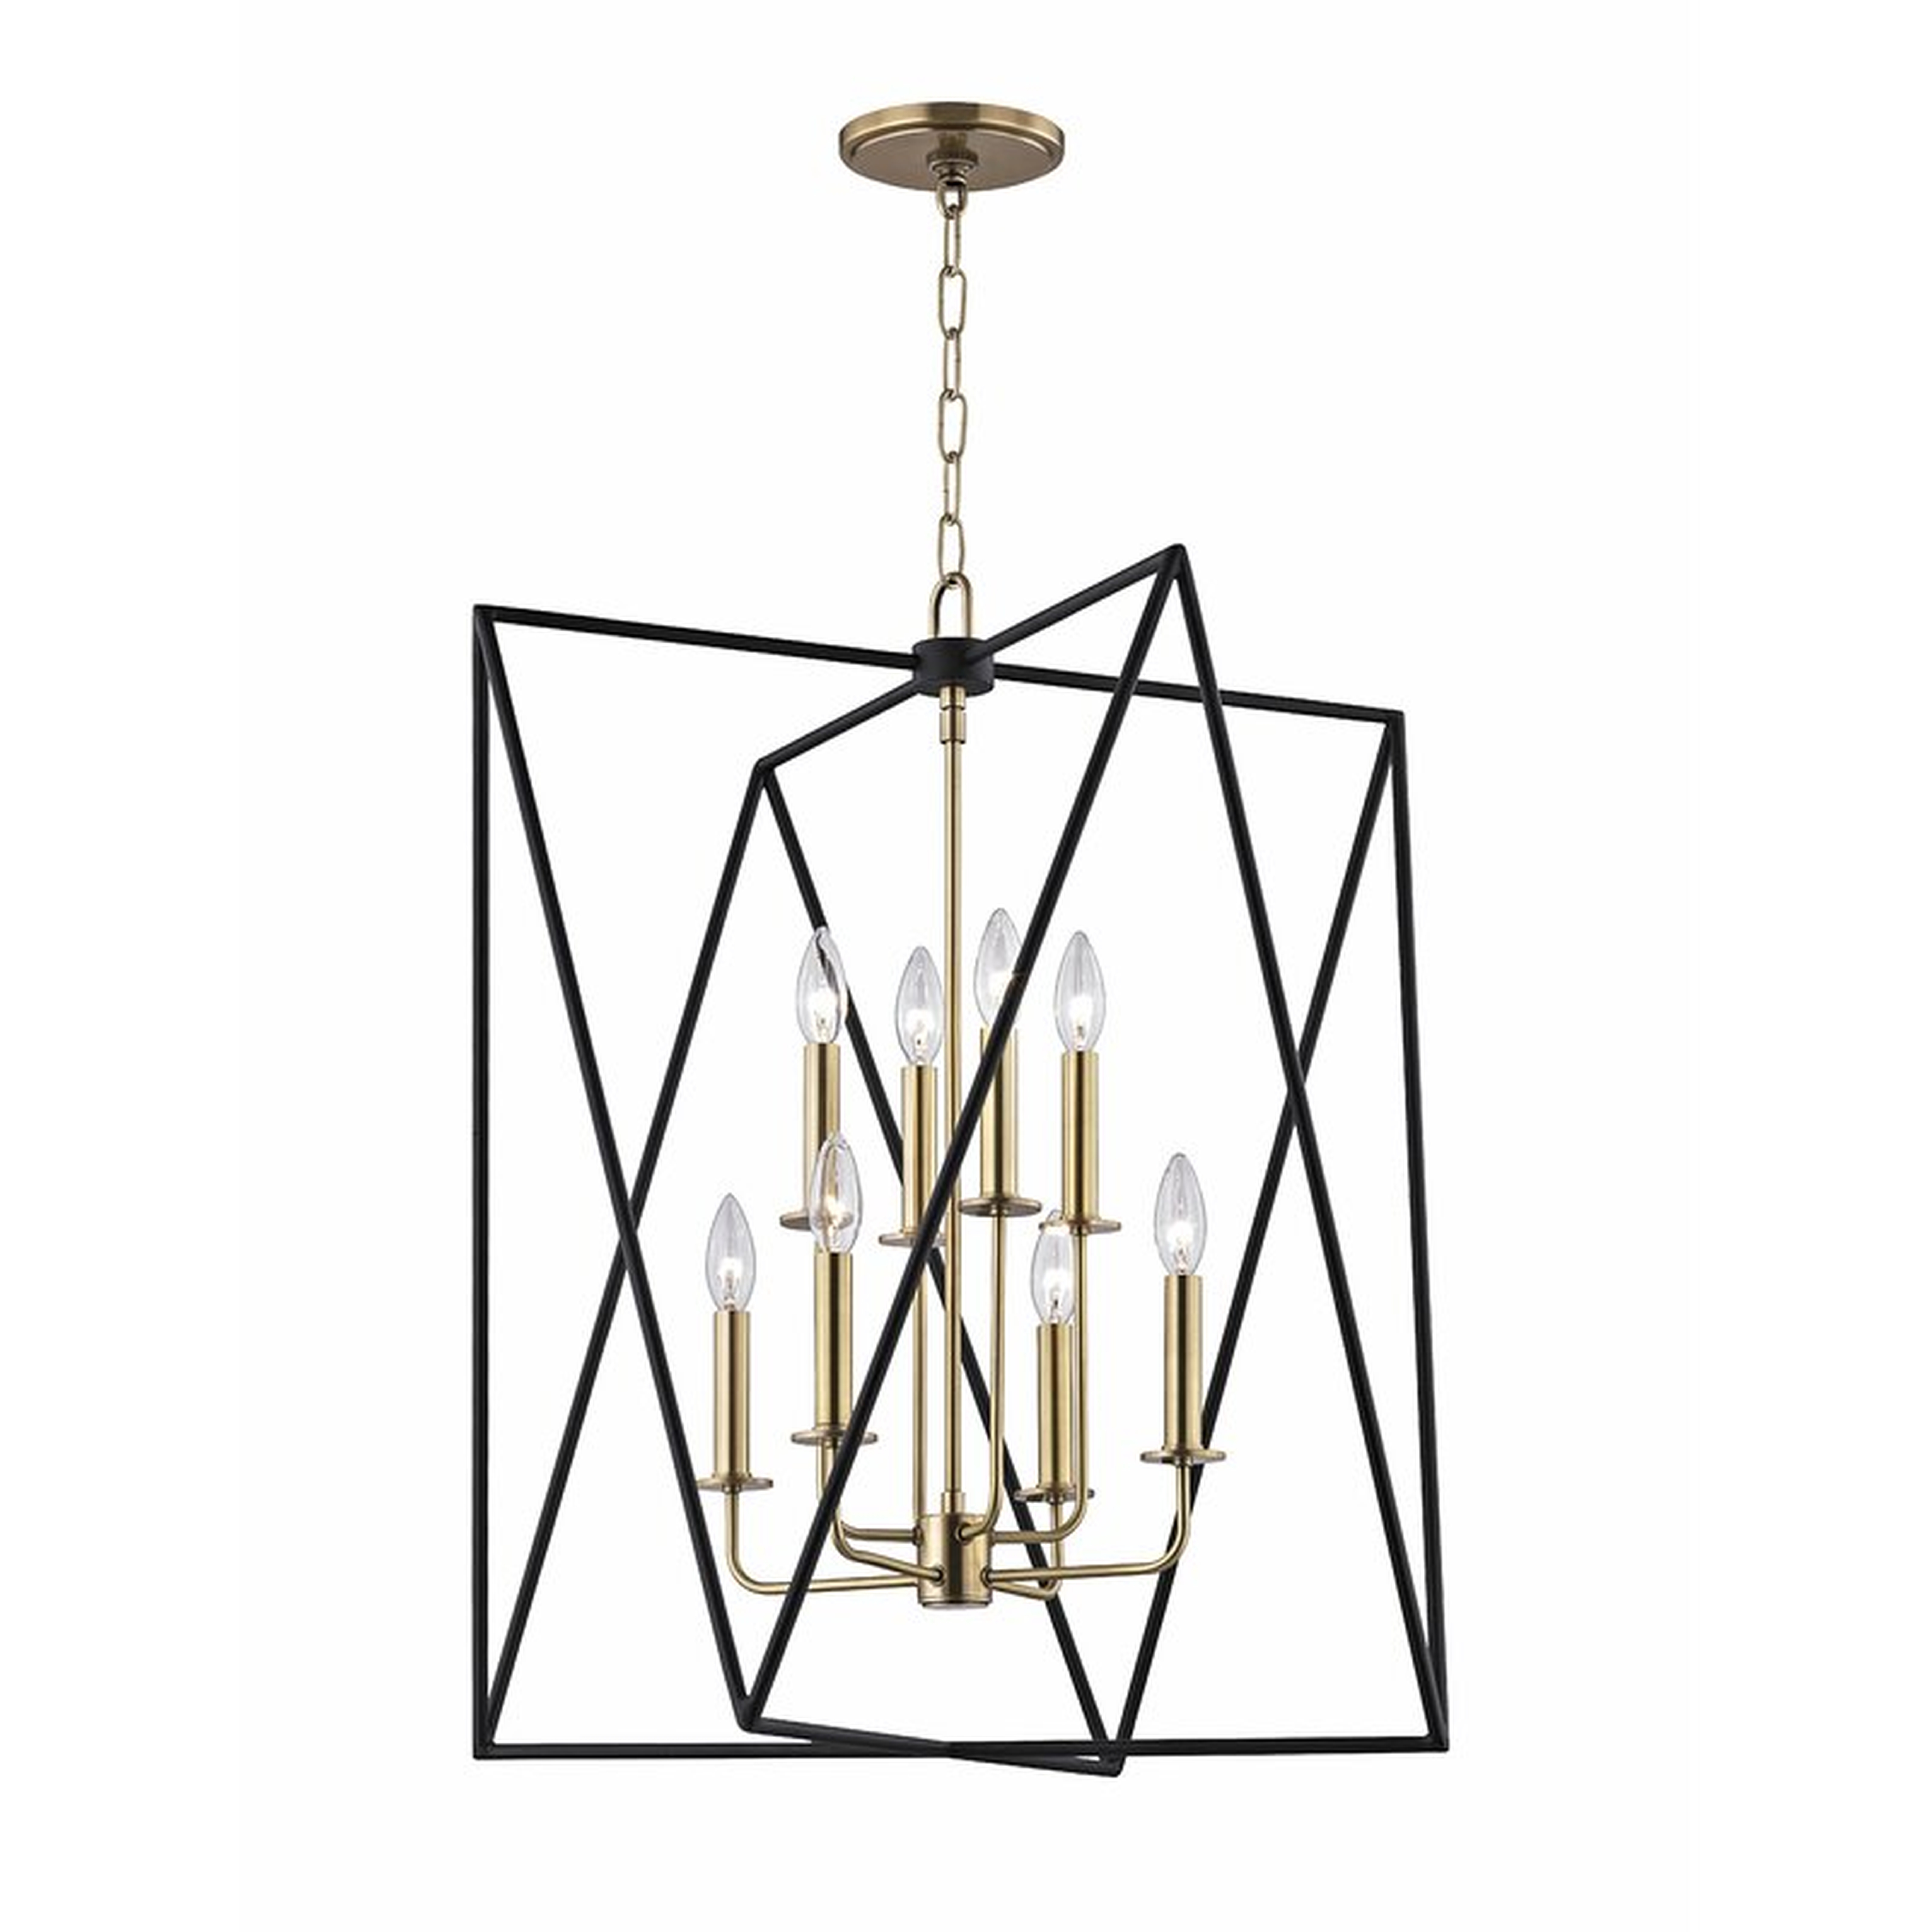 Hudson Valley Lighting Laszlo 8 - Light Candle Style Geometric Chandelier Finish: Polished Nickel, Size: 28.75" H x 28.75" W x 28.75" D - Perigold